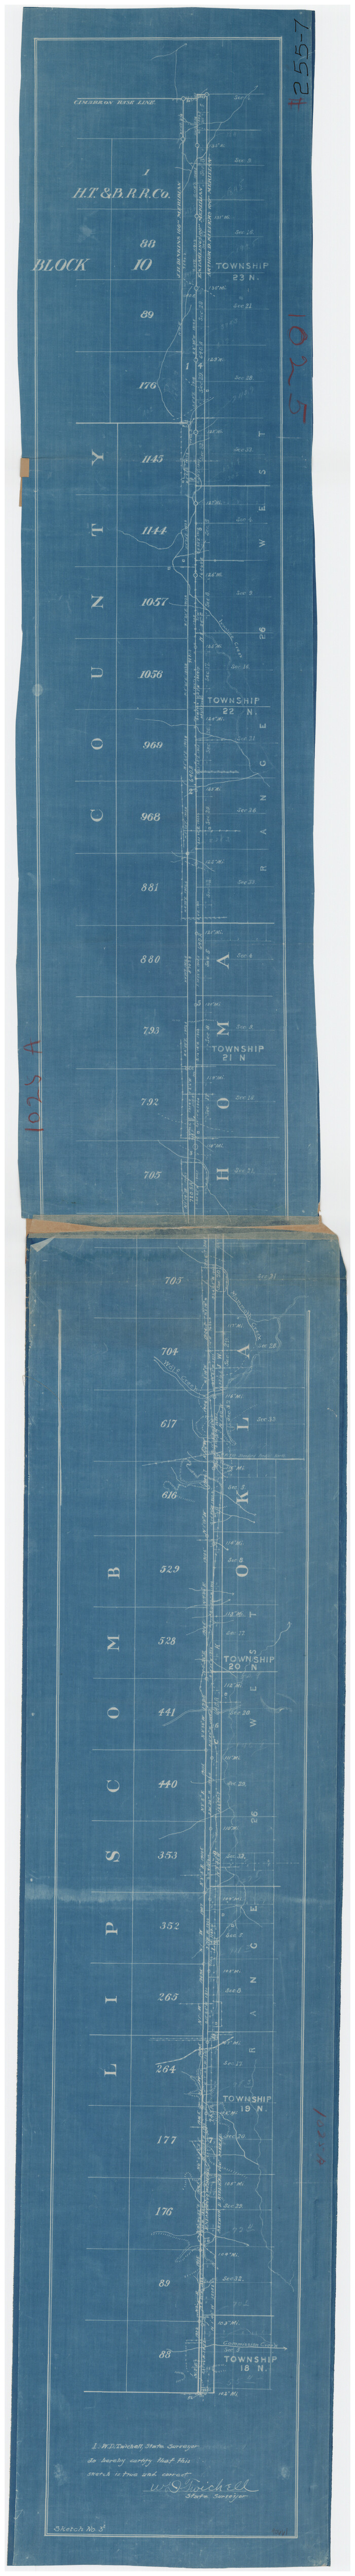 89718, [Sketch showing E. line of Lipscomb County along Oklahoma border], Twichell Survey Records